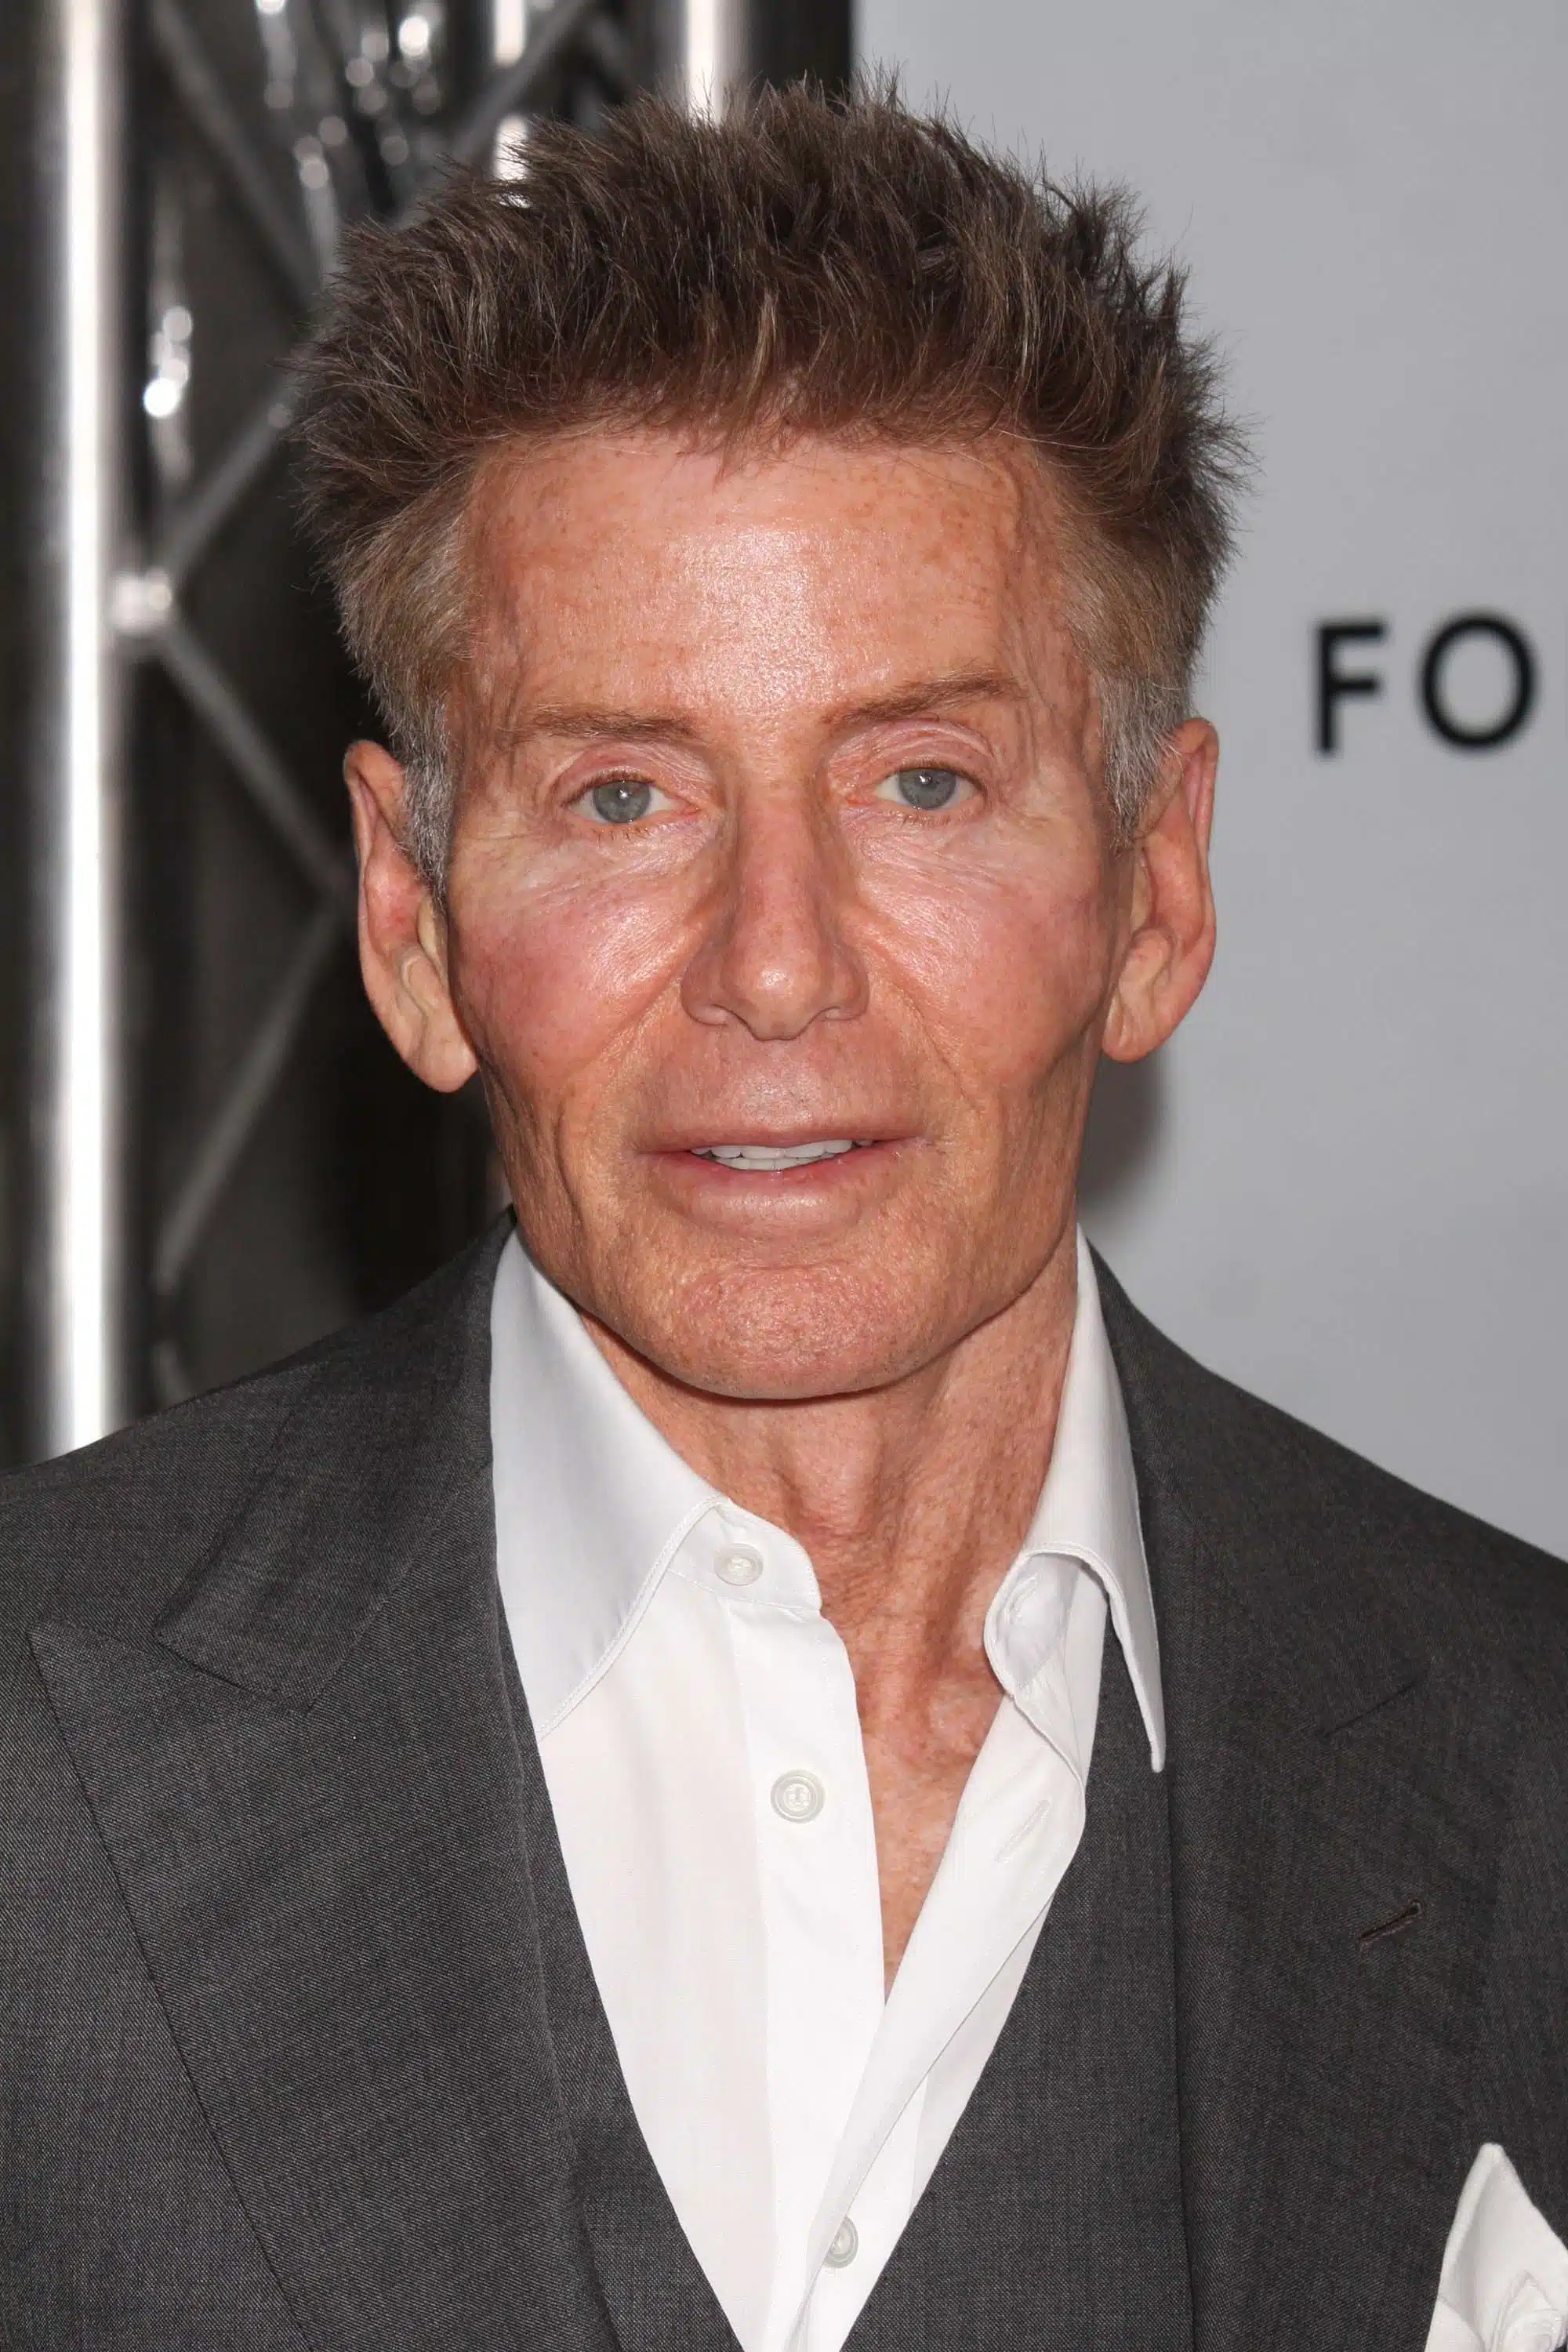 81-Year-Old Calvin Klein Spotted Looking 'Gaunt' After Intense Workout ...